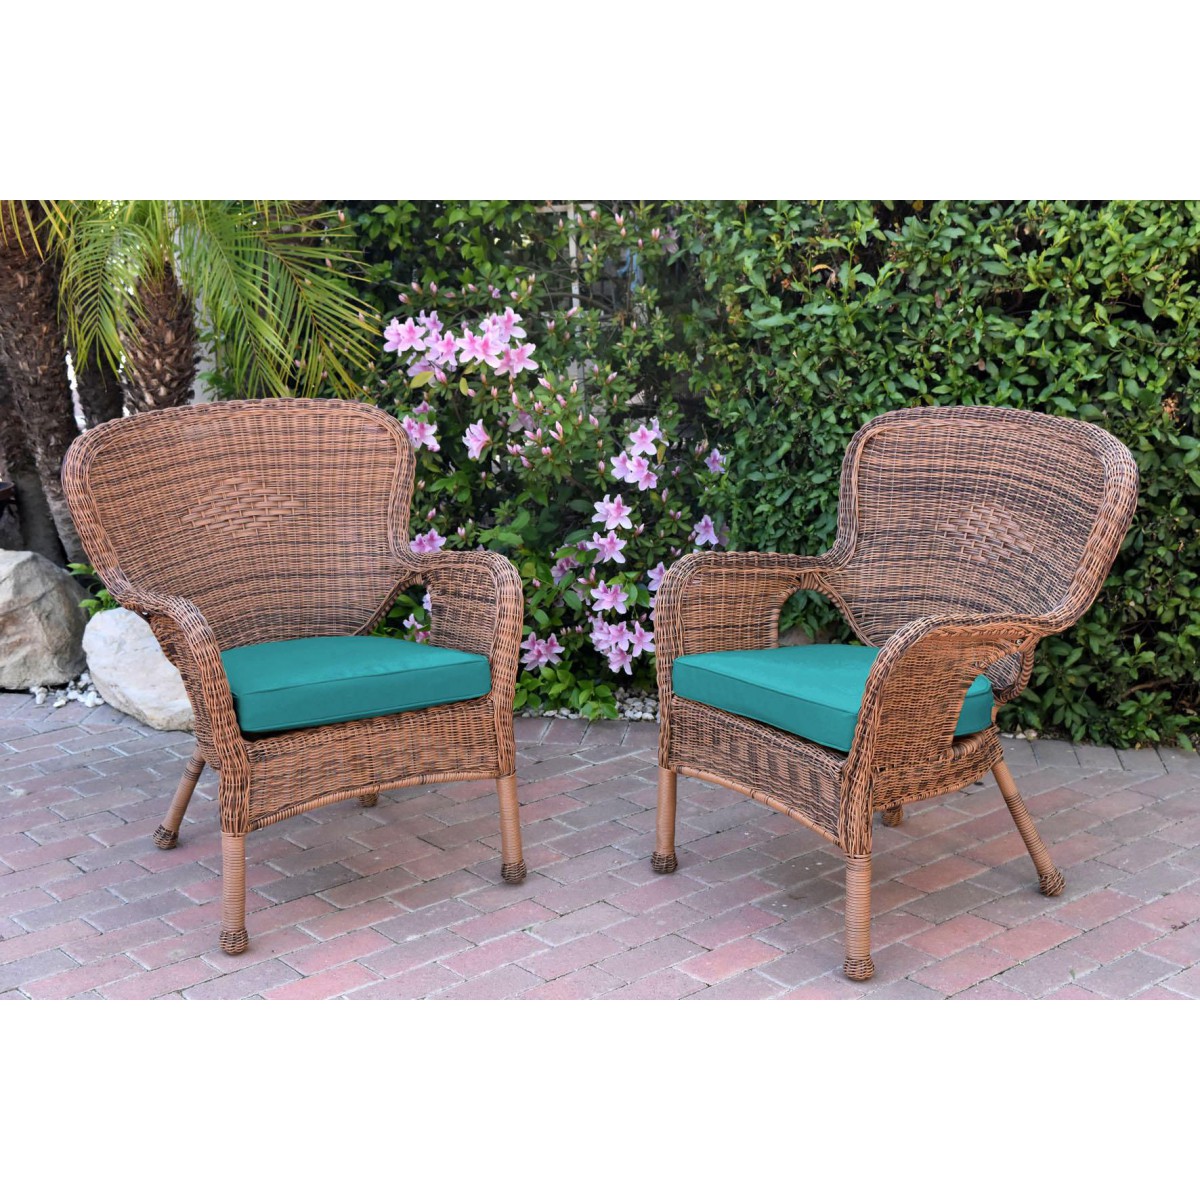 Set of 2 Windsor Honey Resin Wicker Chair with Turquoise ...